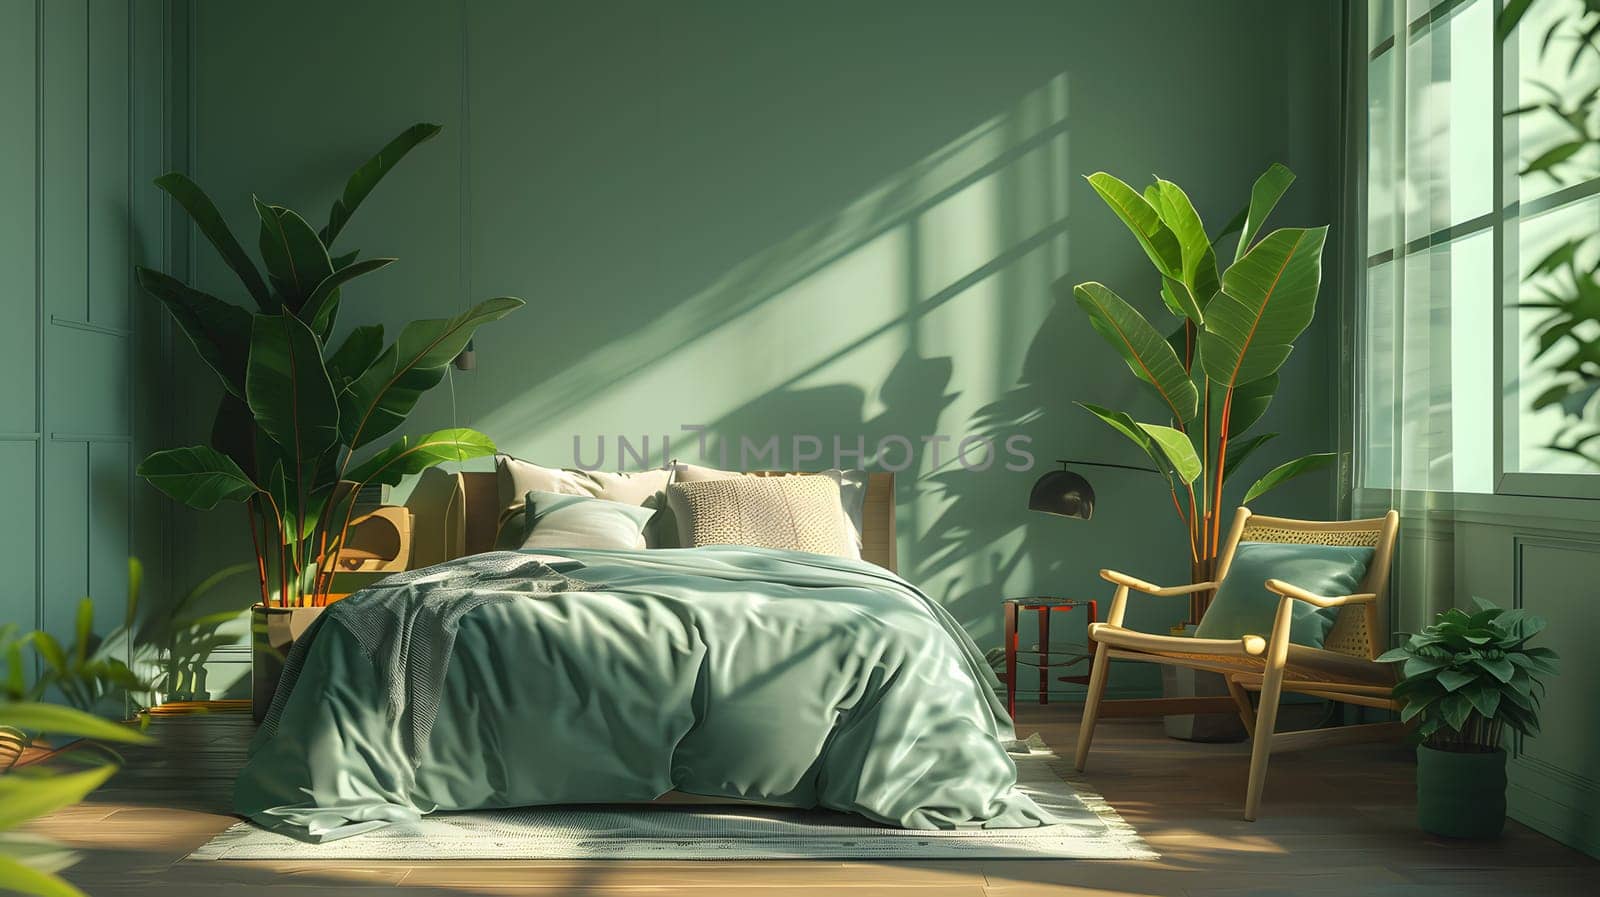 A cozy bedroom with a comfortable bed, chair, and plants by the window. The room is full of art and comfort, making it a relaxing space in the house